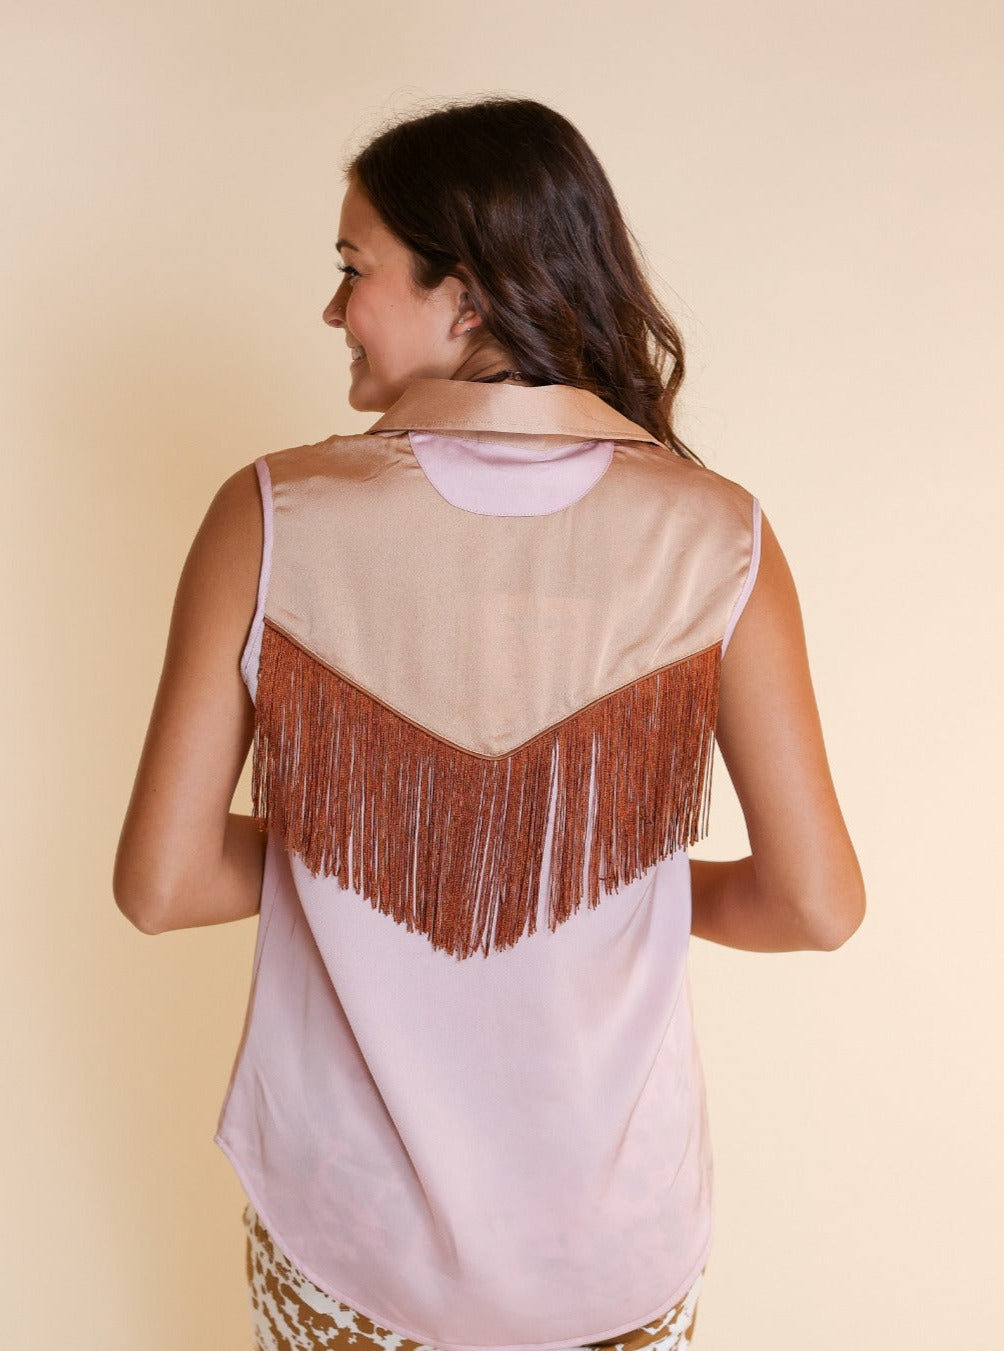 A Little Bit of Sass Satin Top with Fringe Detail